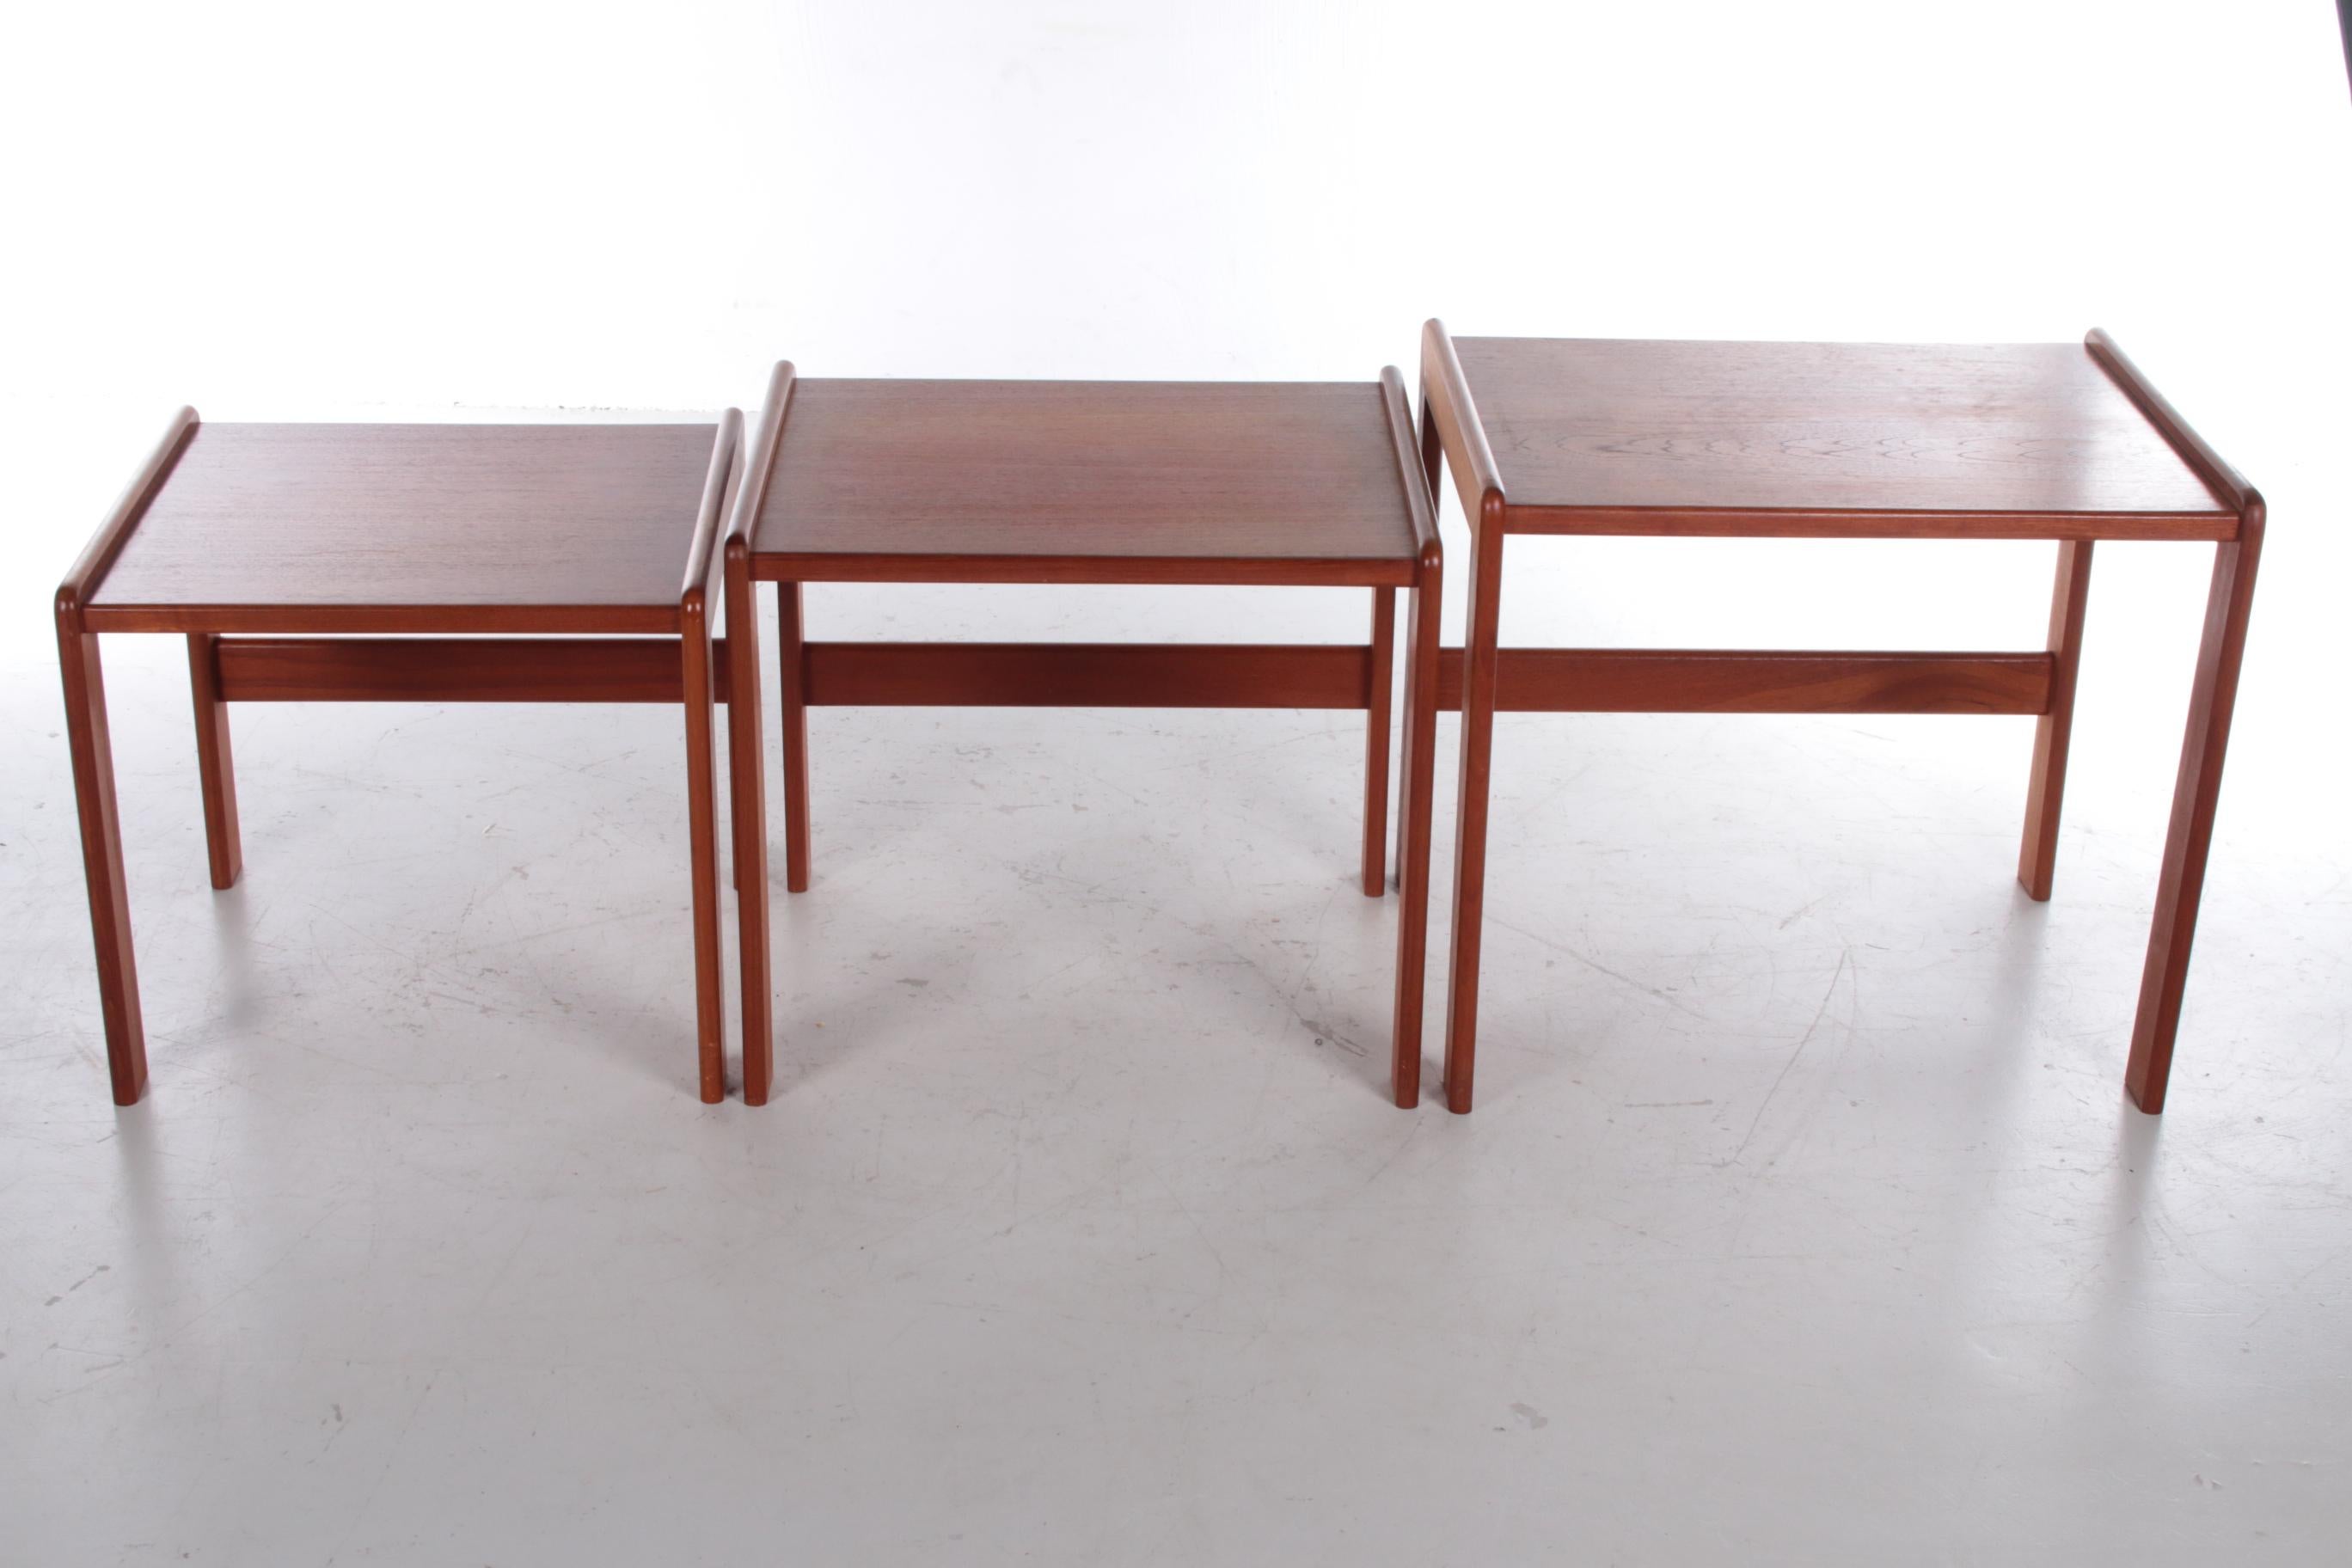 Vintage Set of Side Tables Made of Teak Made in the 1960s For Sale 2